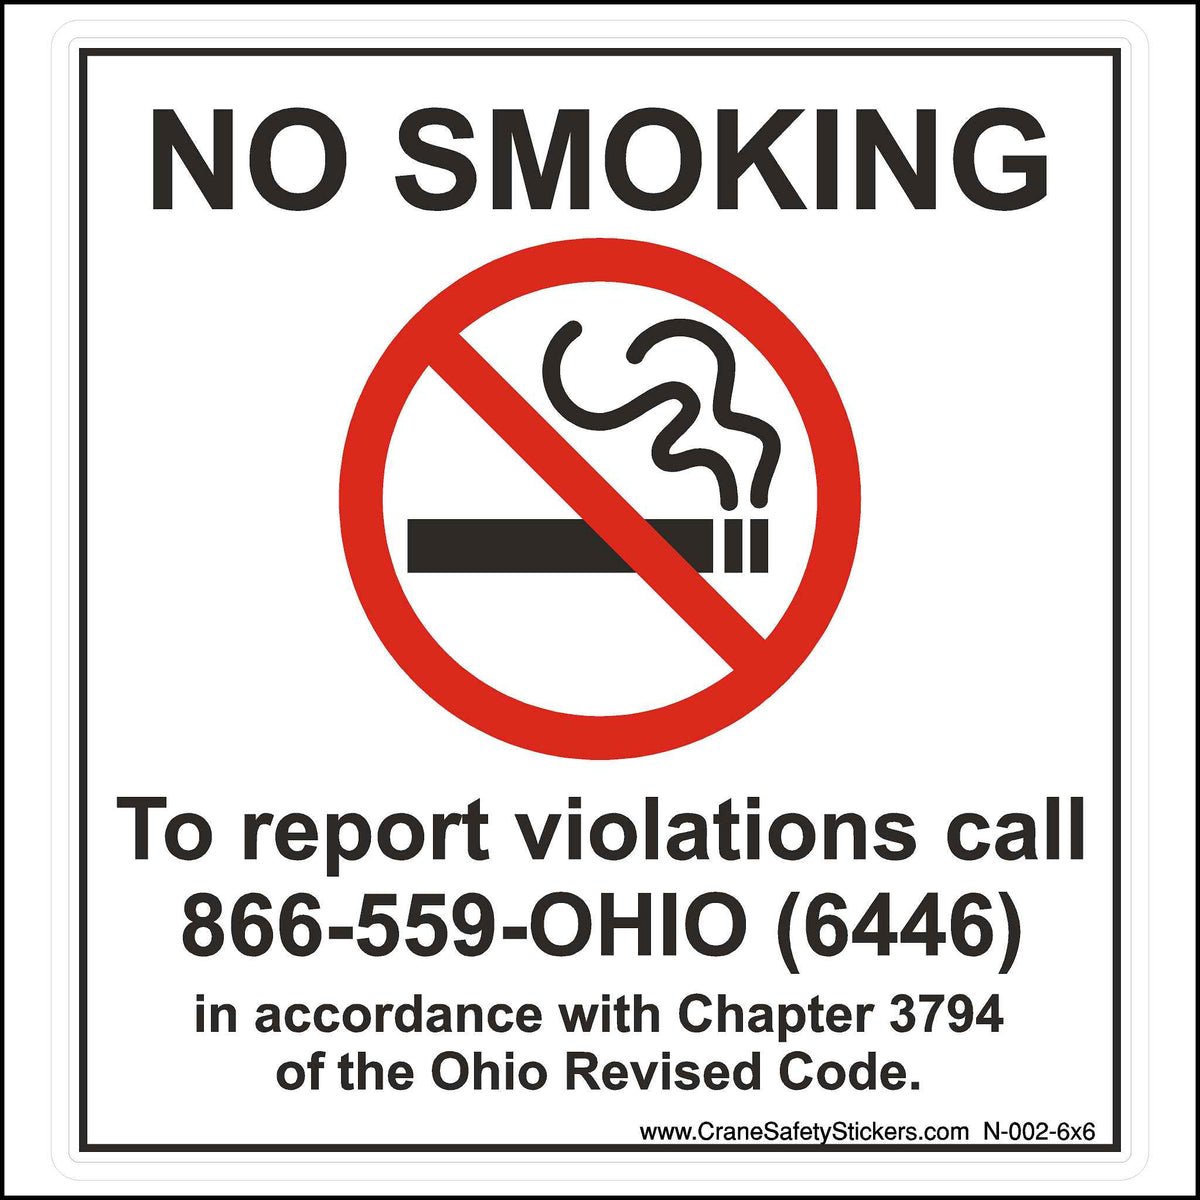 No Smoking Decal For Ohio Chapter 3794 of Ohio Revised Code. 6 inches wide by 6 inches tall in size.